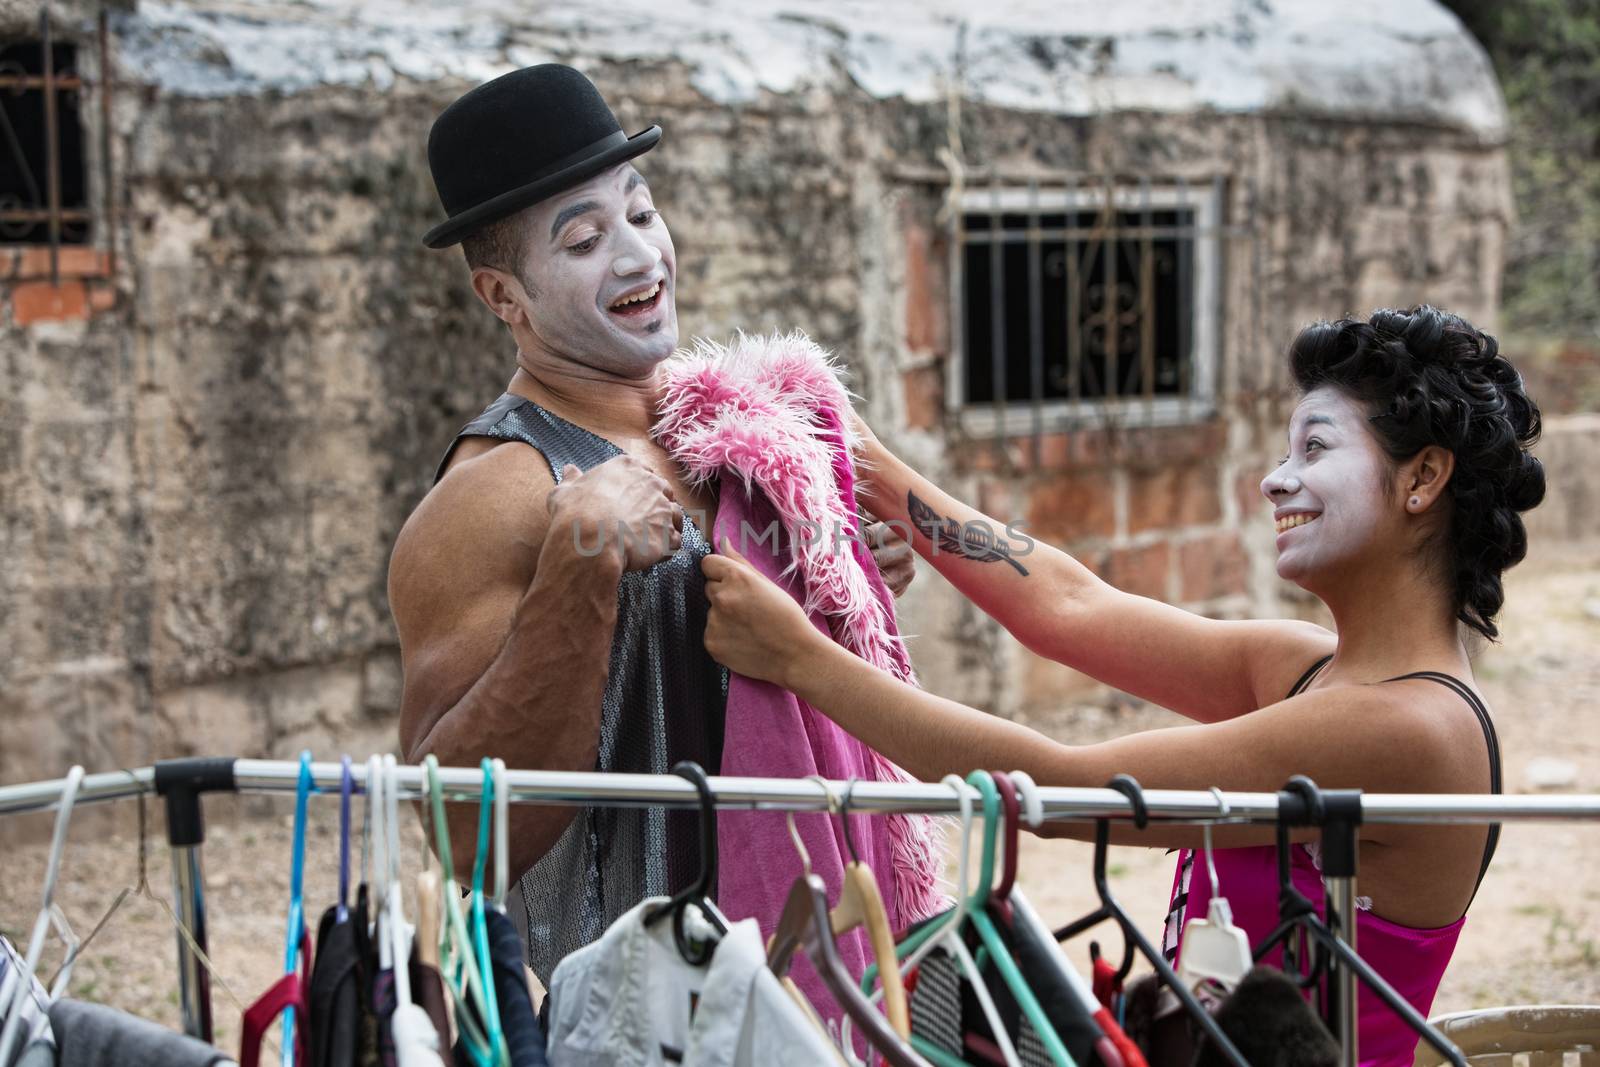 Cirque Clowns Fitting Costumes by Creatista